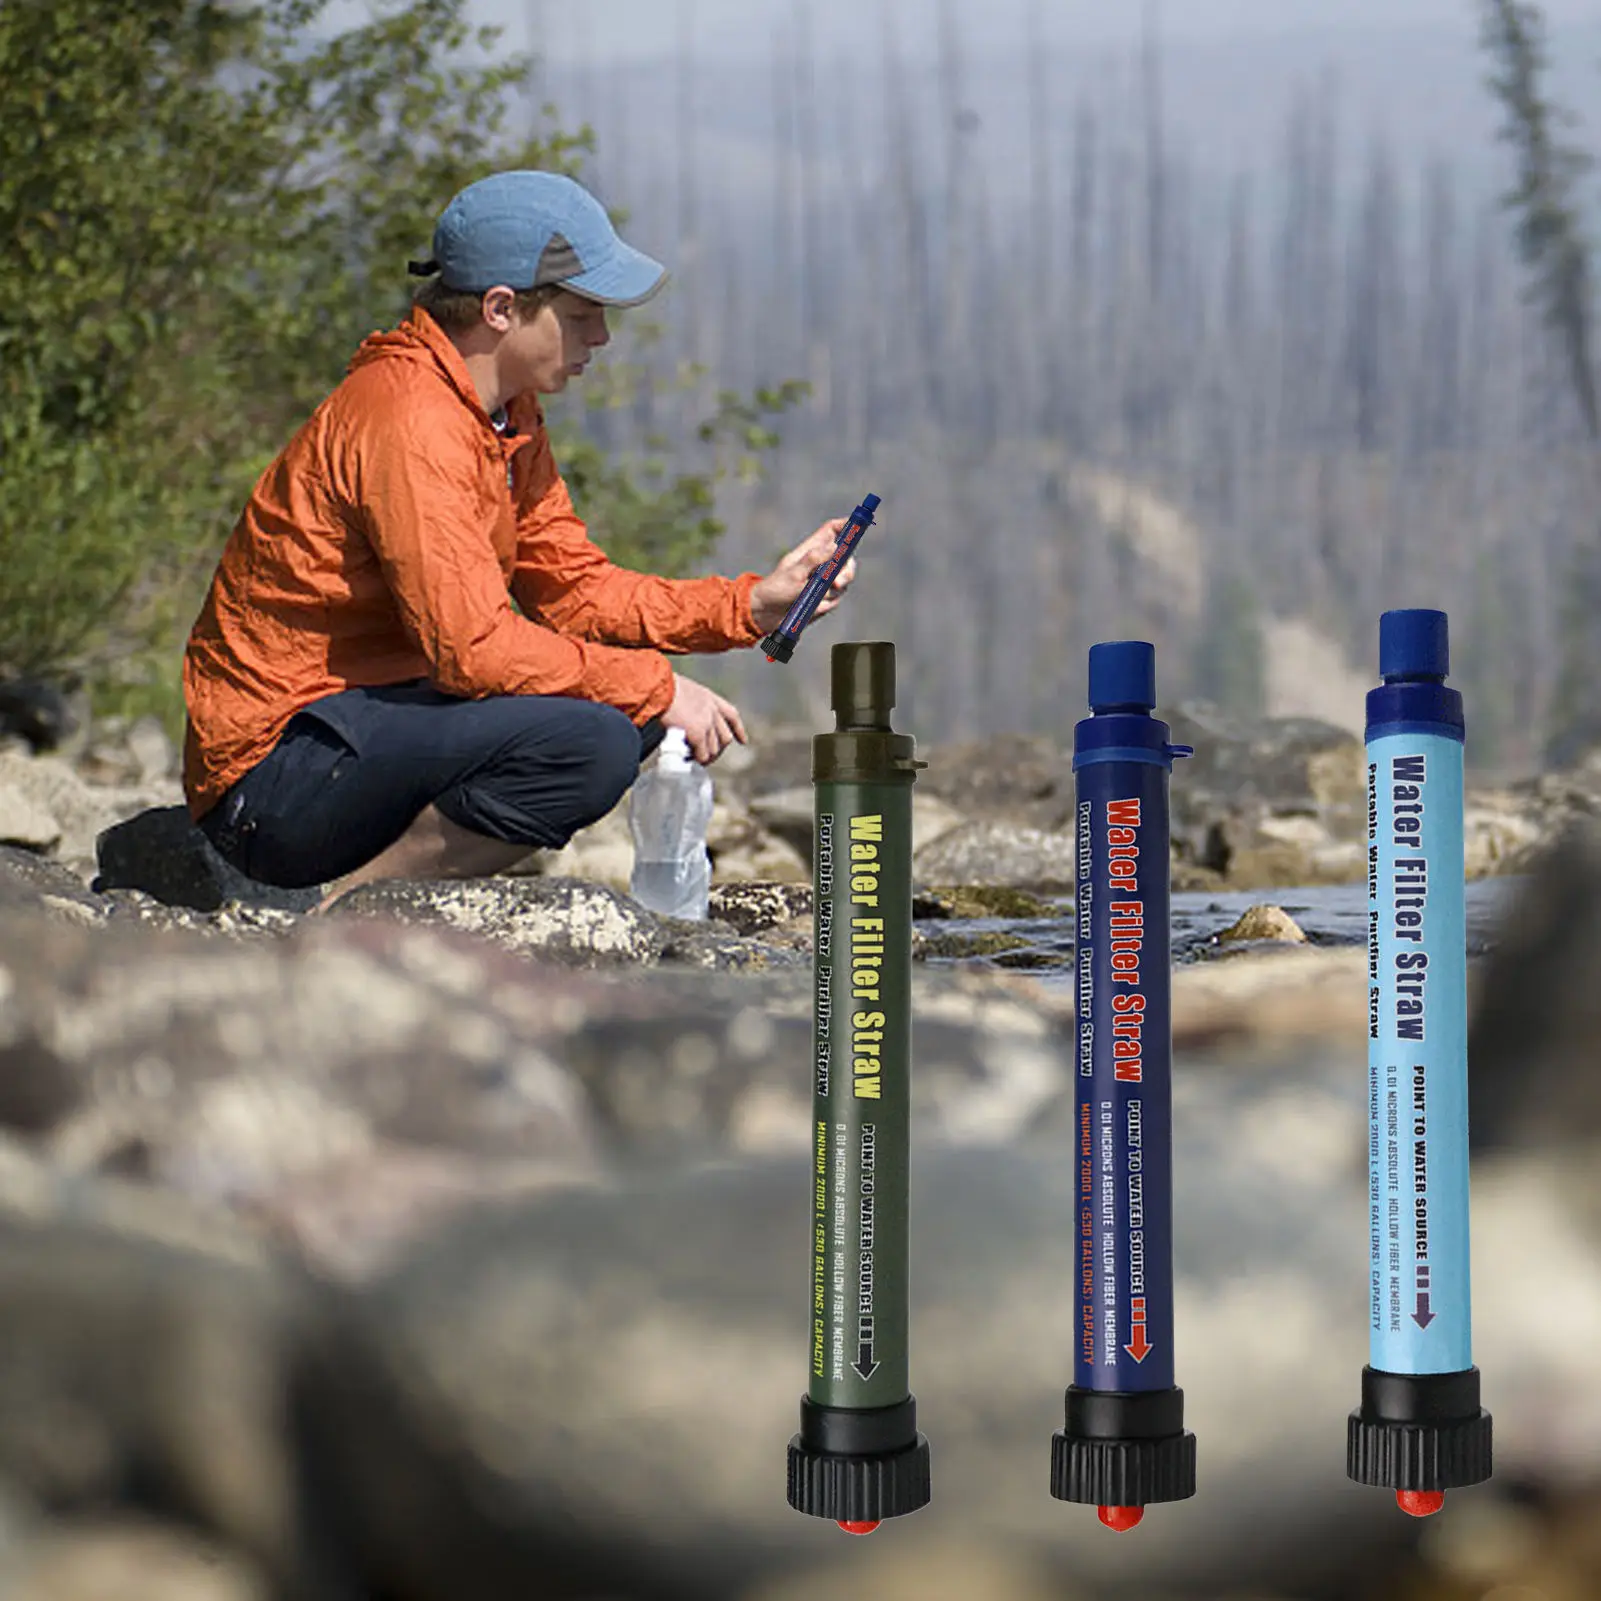 

Outdoor Water Purifier Camping Hiking Emergency Life Survival Portable Purifiertravel Wild Drink Ultrafiltration Water Filter